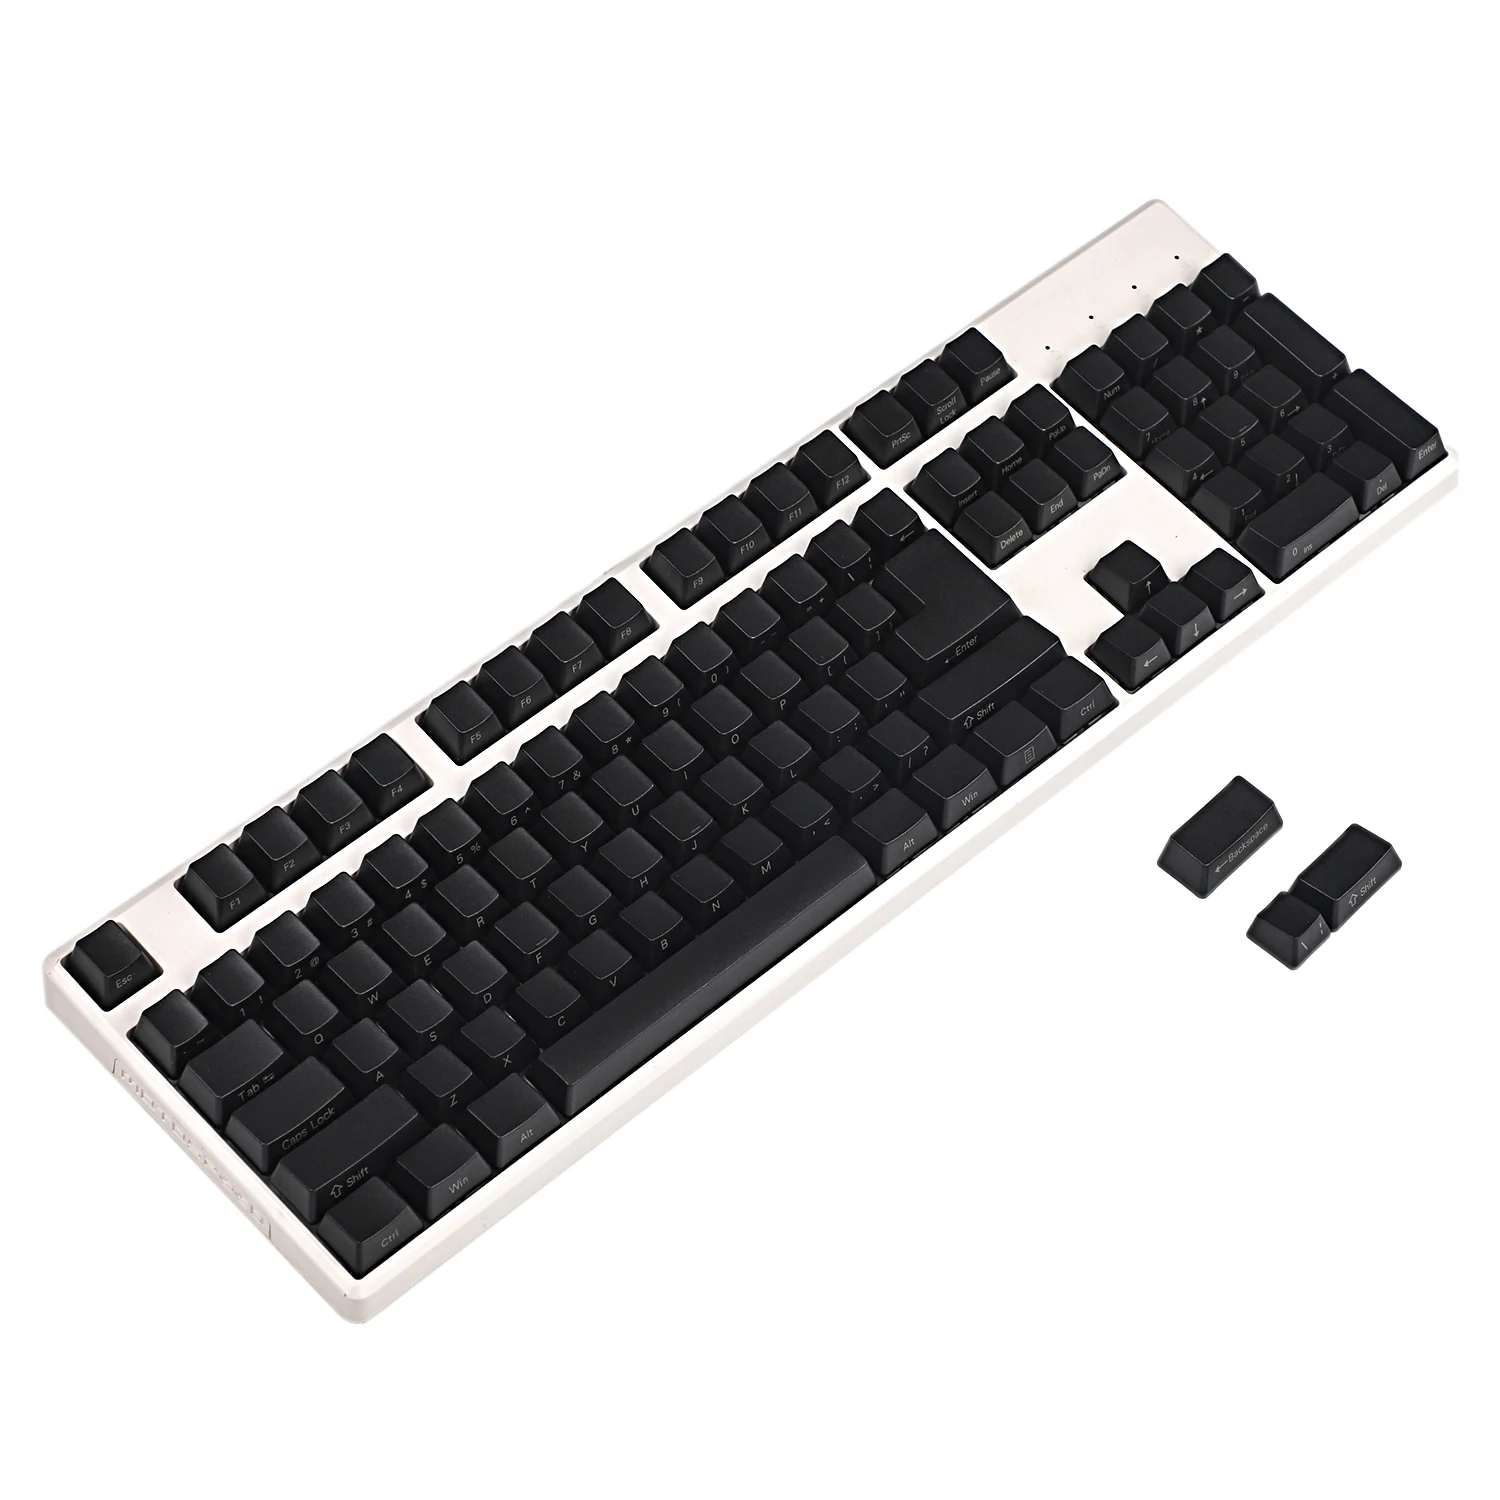 YMDK Thick PBT Dolch OEM Profile Russian Keycap Keyset Suitable For Steelseries 6GV2 7G 4 - Pudding Keycap